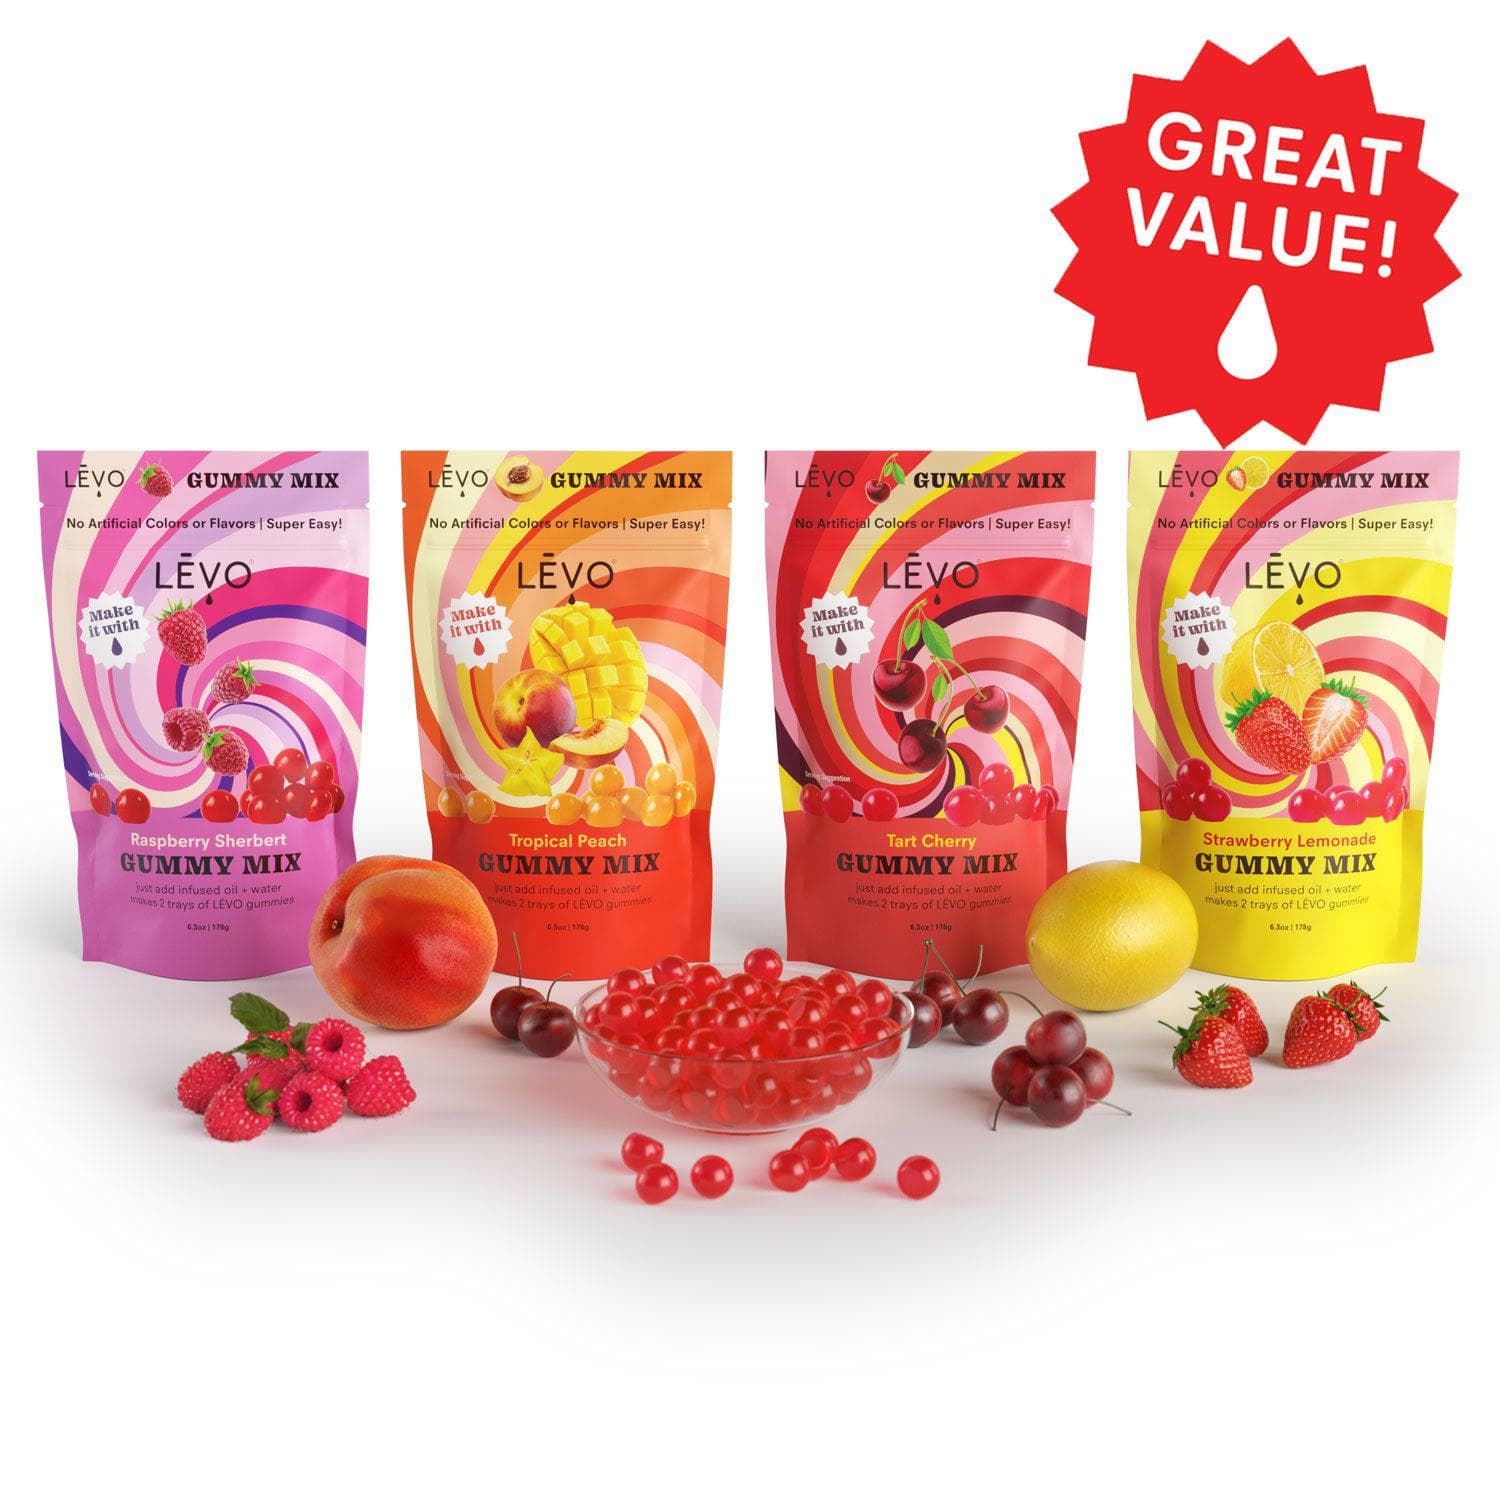 Buy more, save more! Subscribe to LEVO gummy mix four pack for monthly shipments and save 10%.